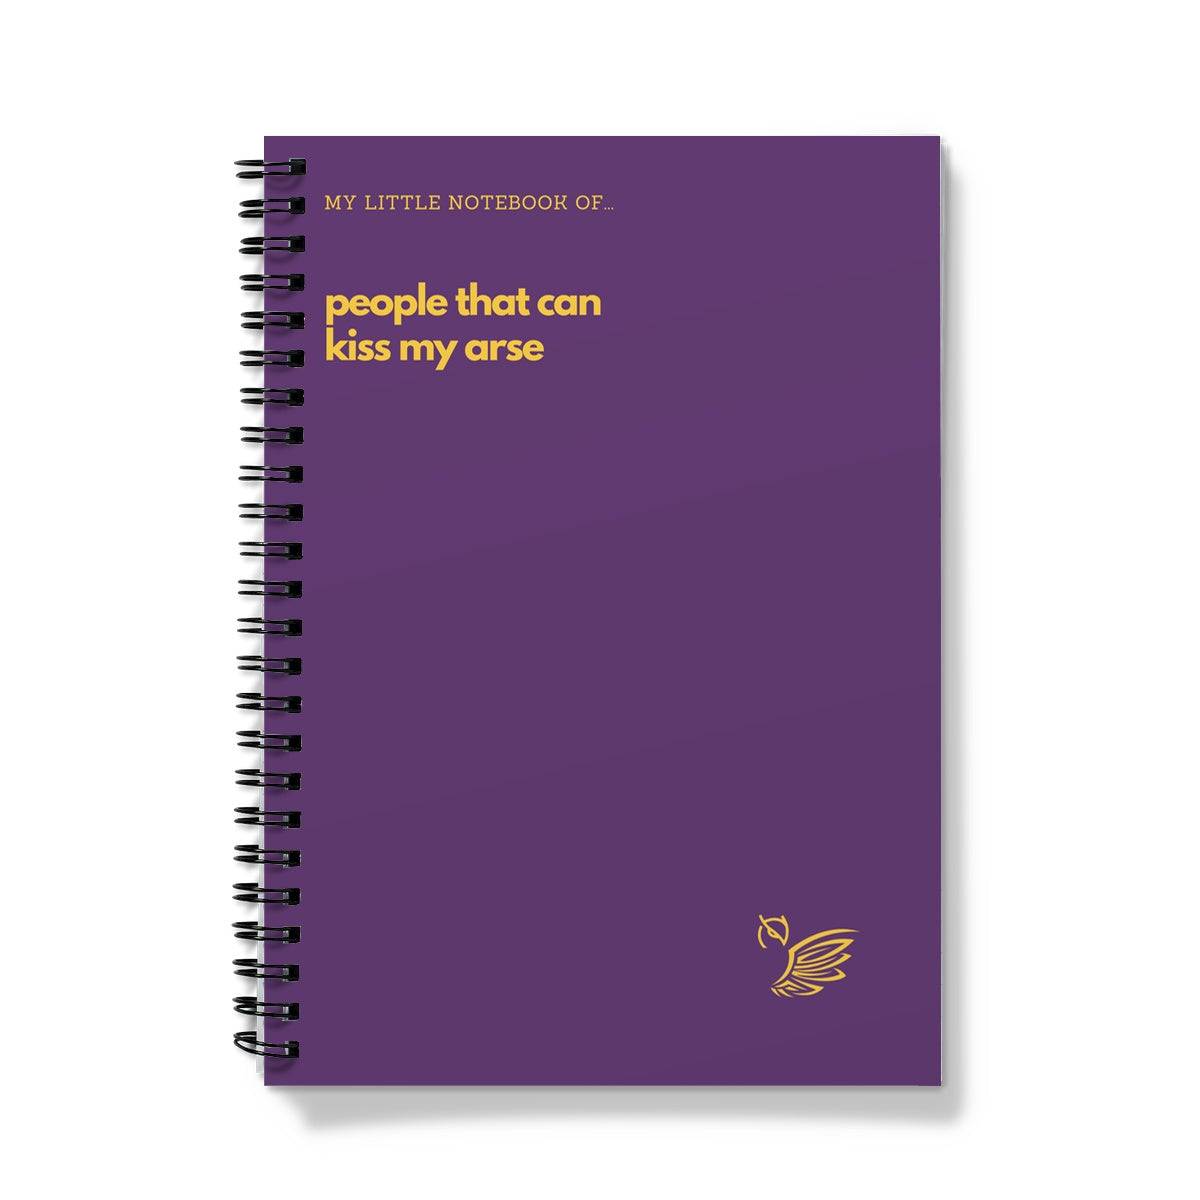 My Little Notebook Of... People That Can Kiss My Arse Notebook